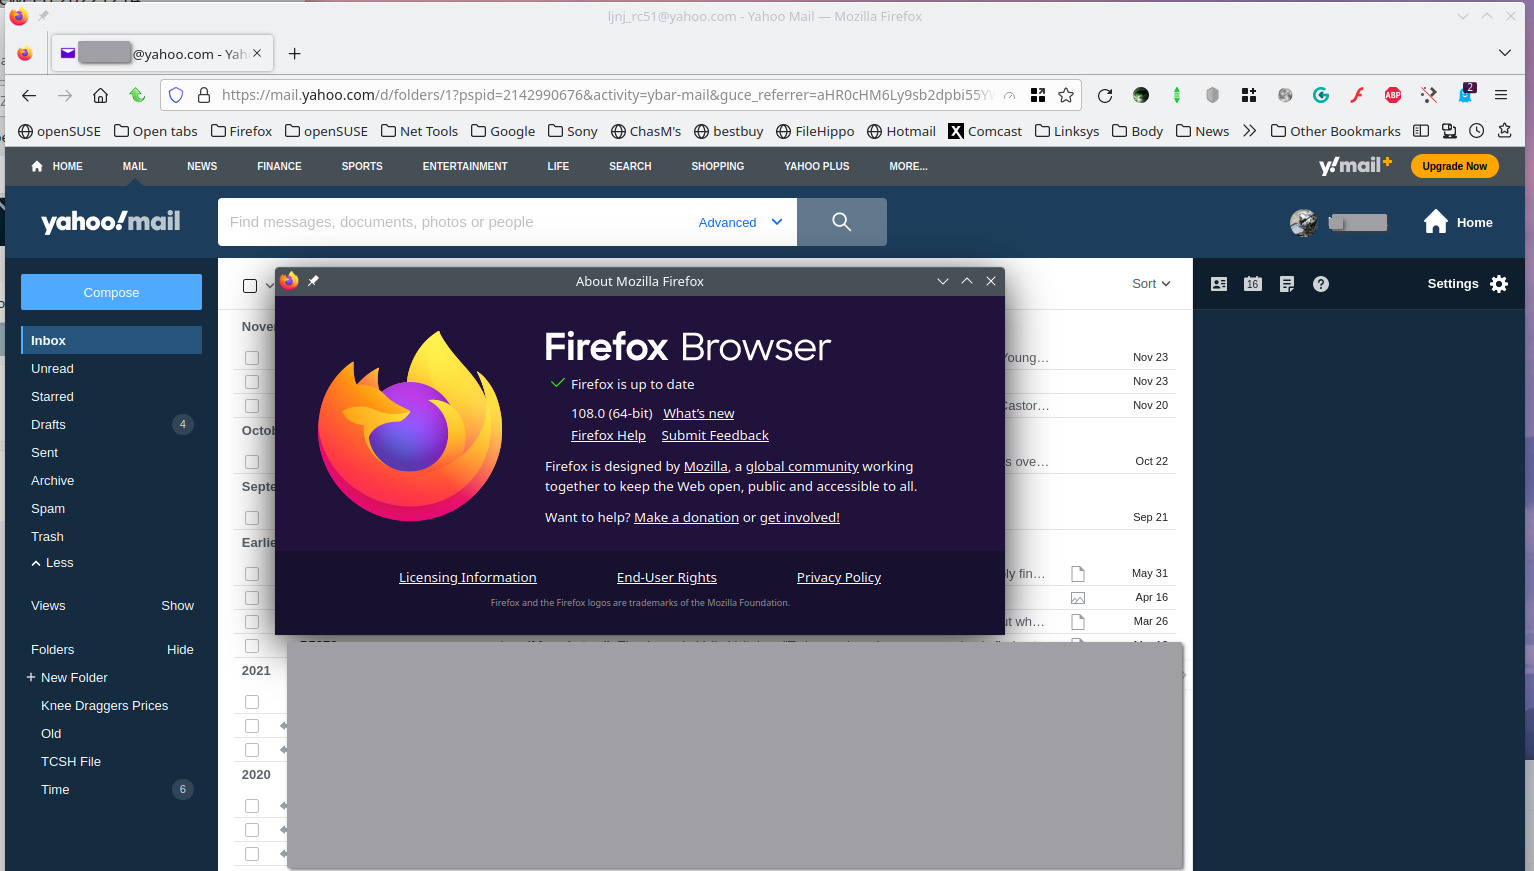 How To Make Yahoo! Mail The Default Email In Firefox